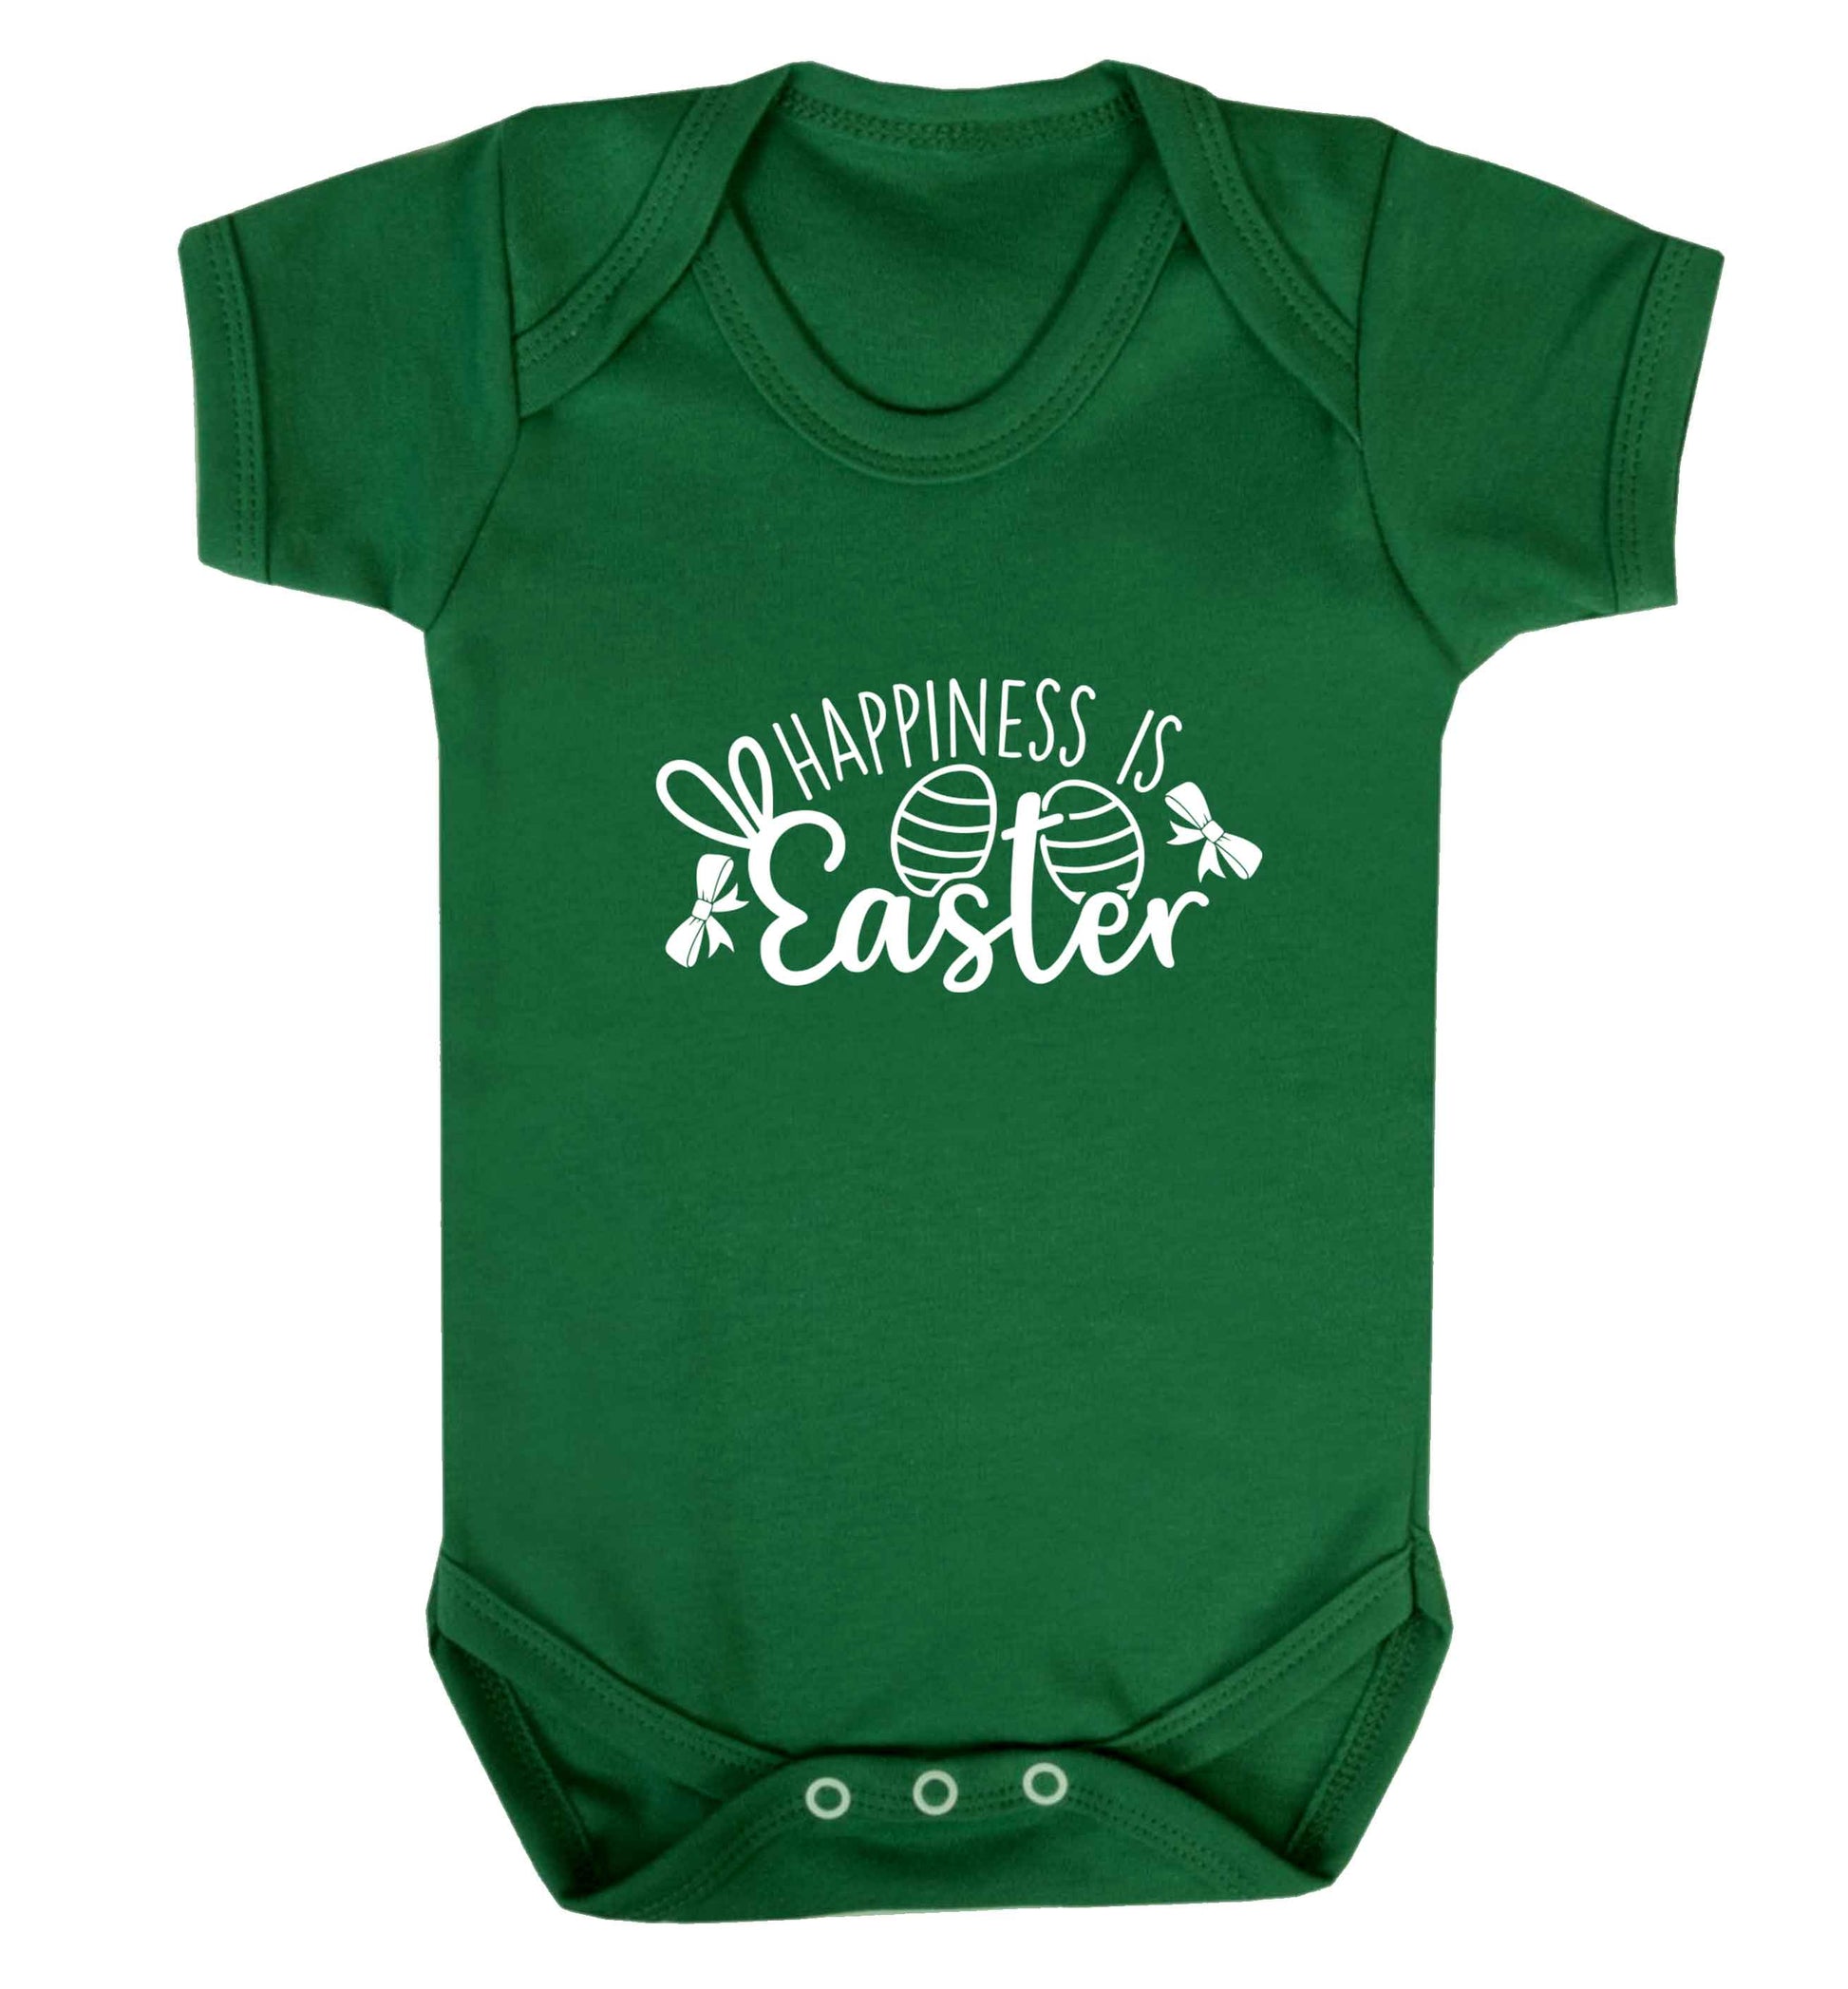 Happiness is easter baby vest green 18-24 months